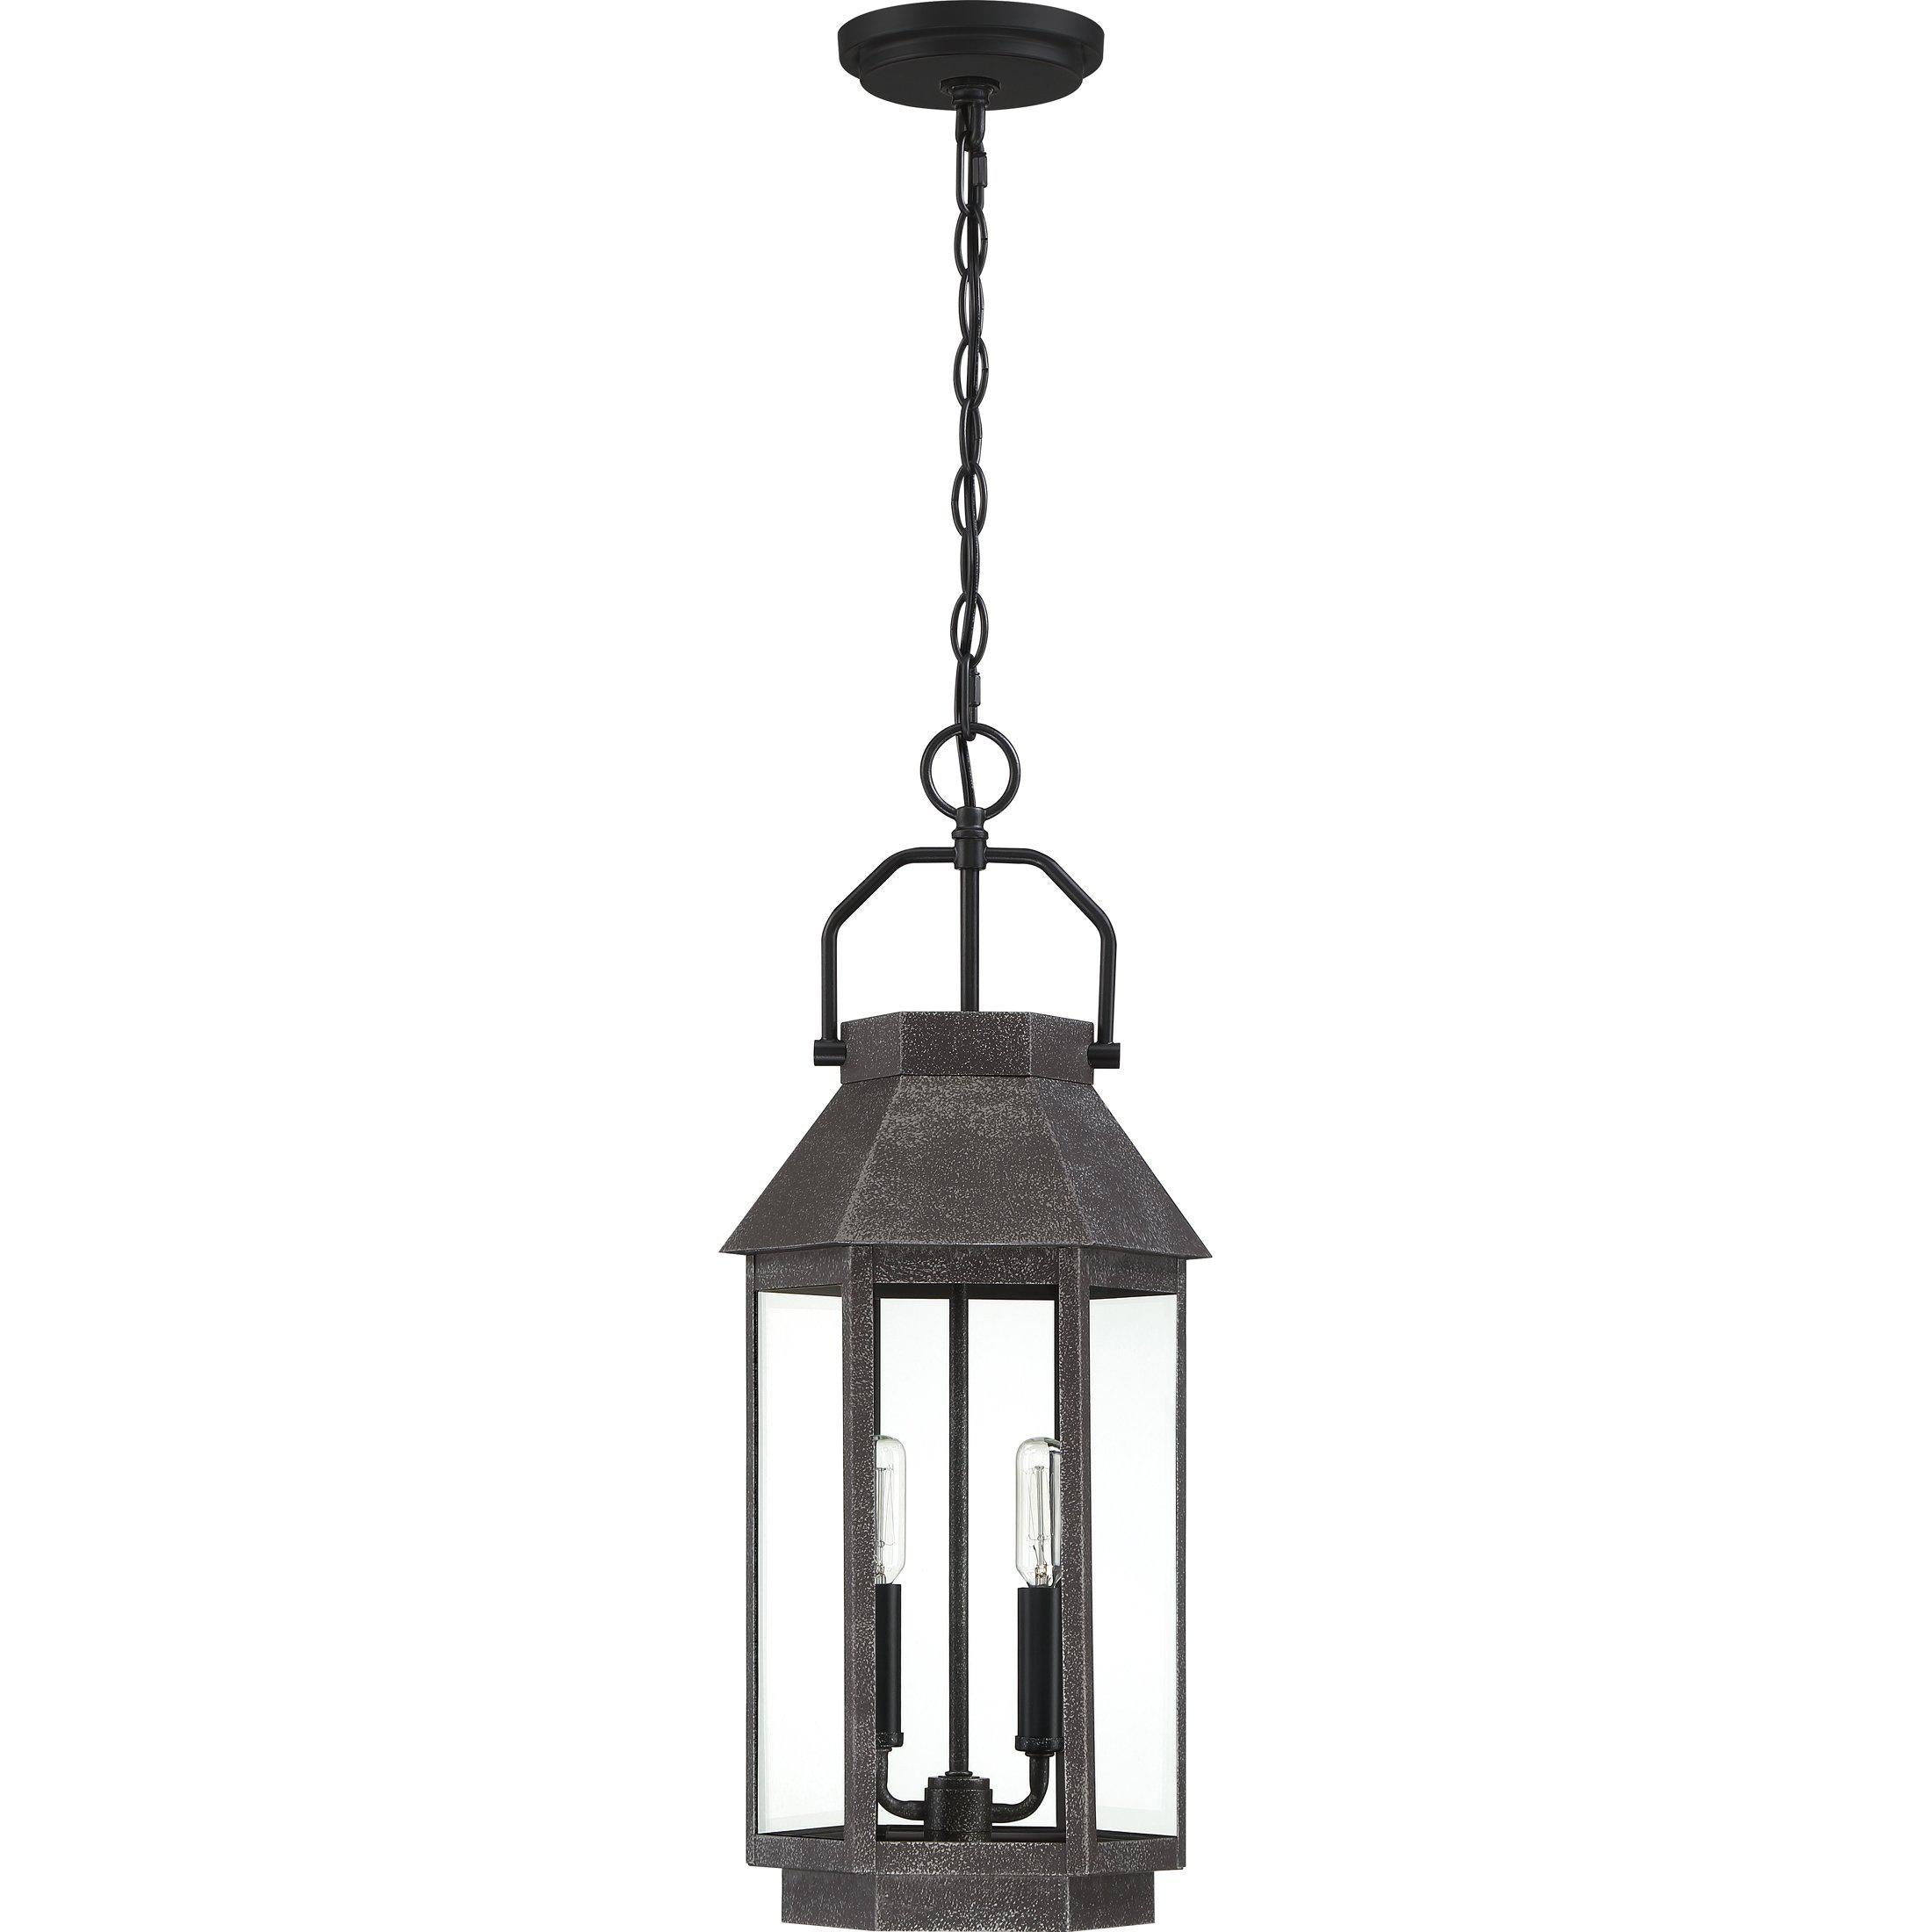 Quoizel  Campbell Outdoor Lantern,Hanging Outdoor Light Fixture l Hanging Quoizel   